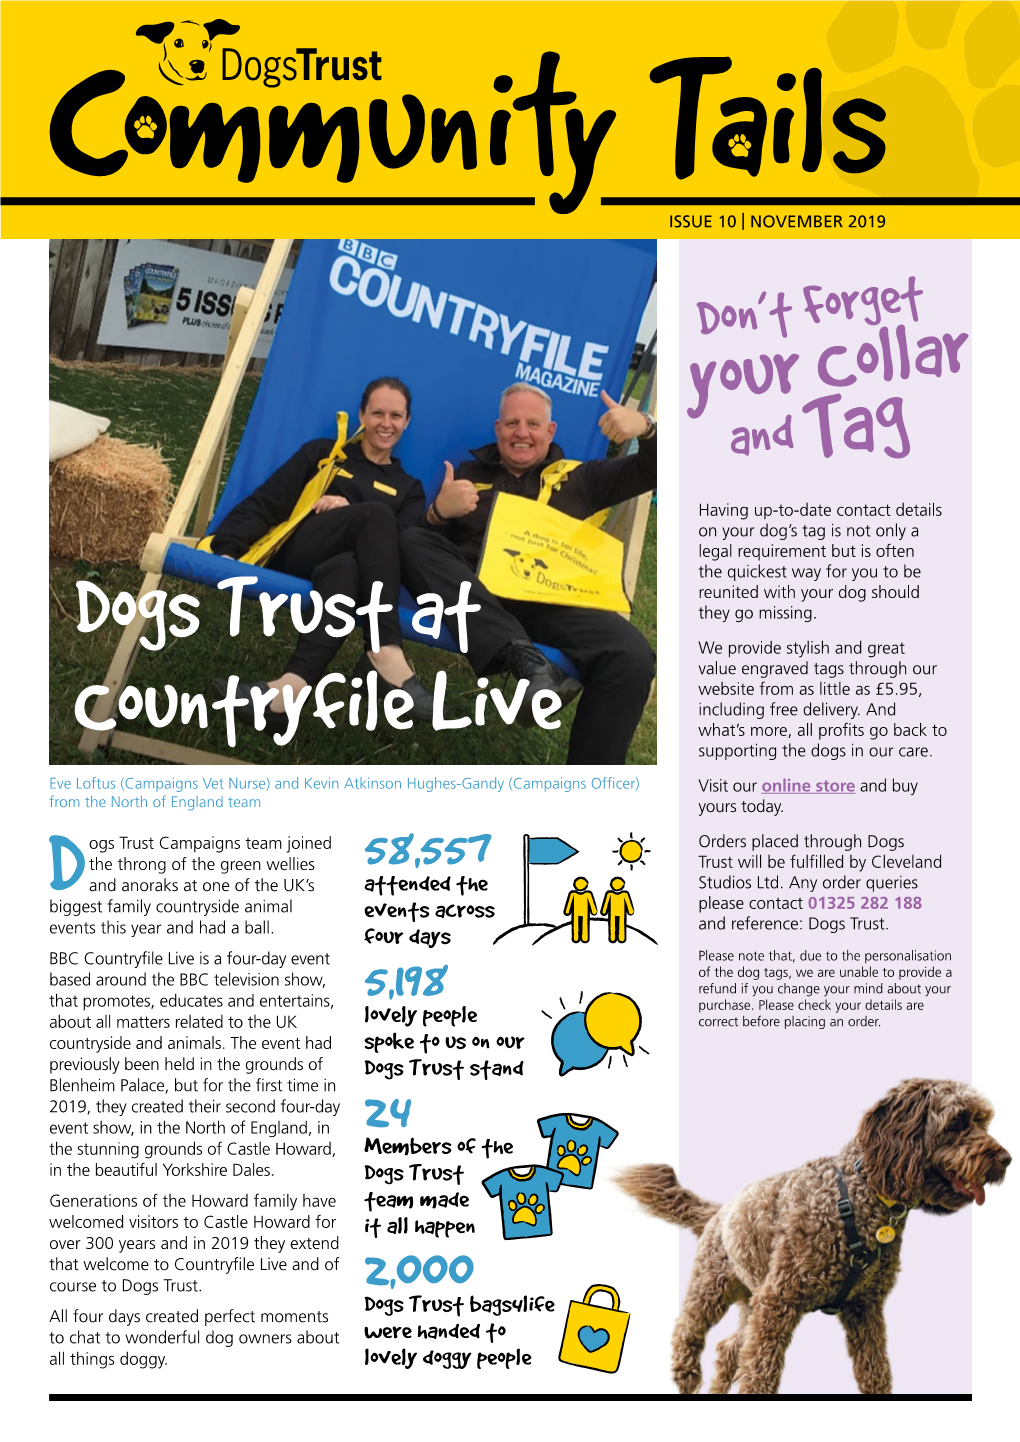 Dogs Trust at Countryfile Live